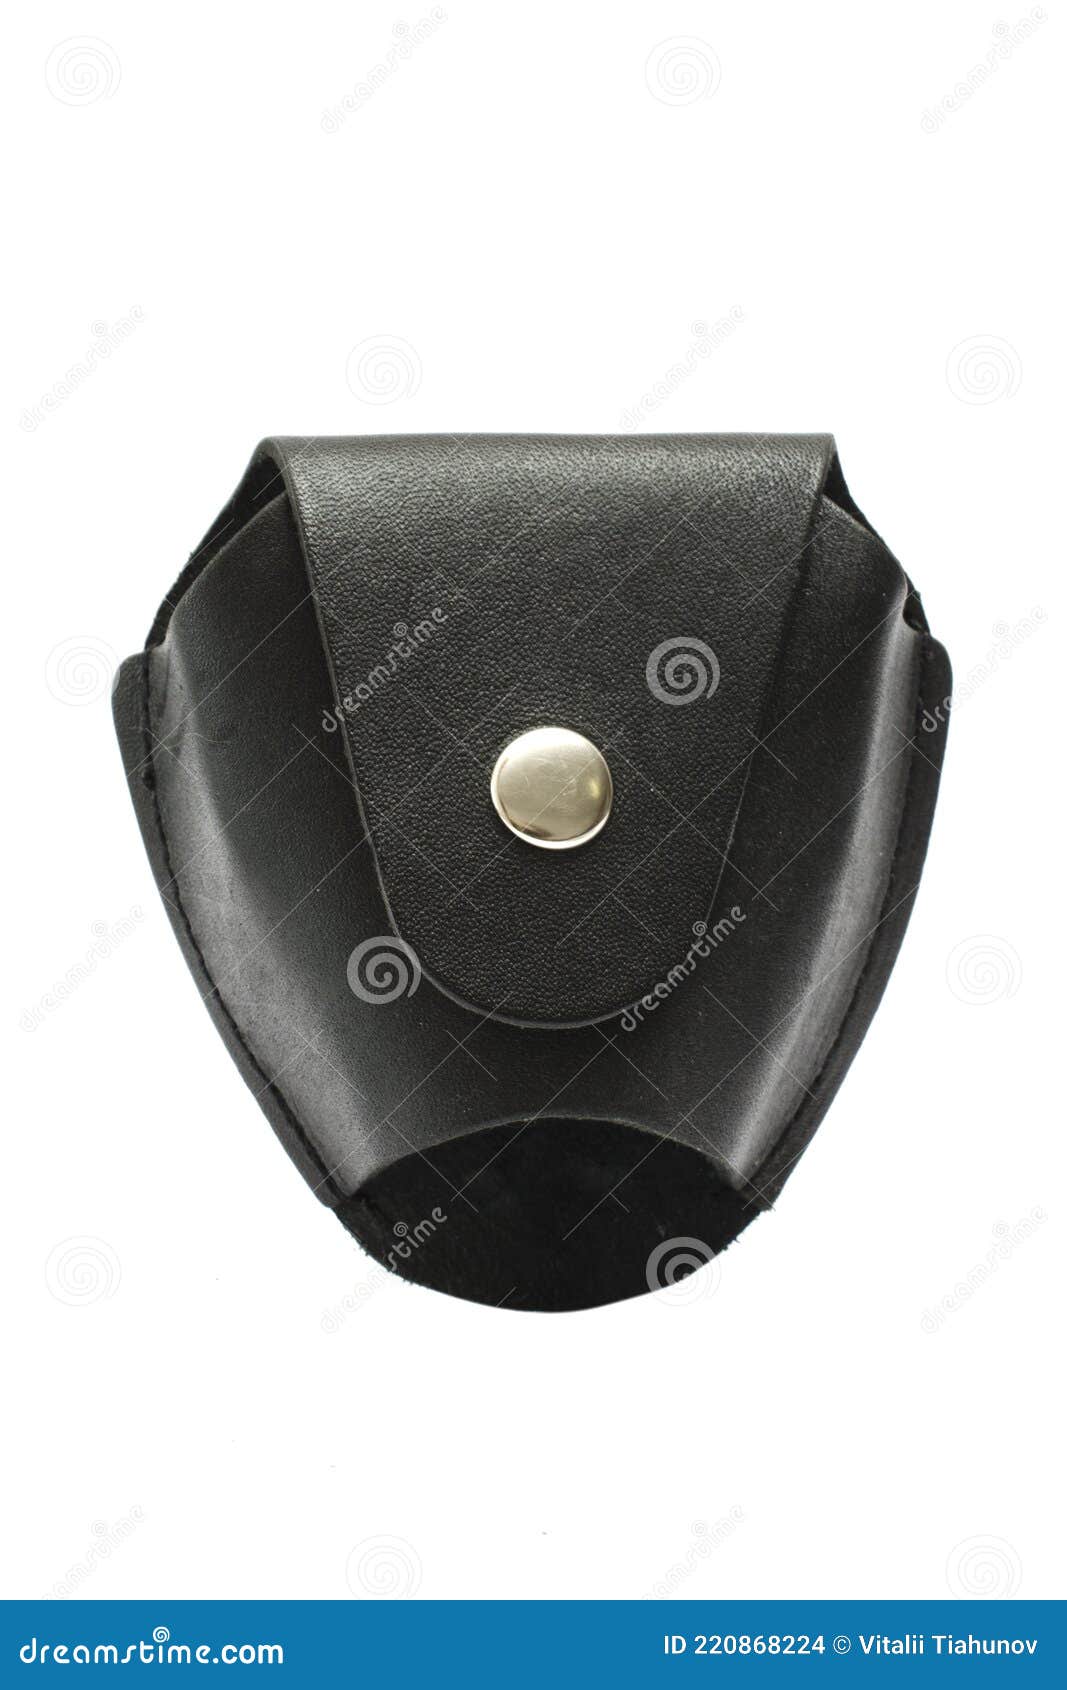 black leathers case for handcuffs 